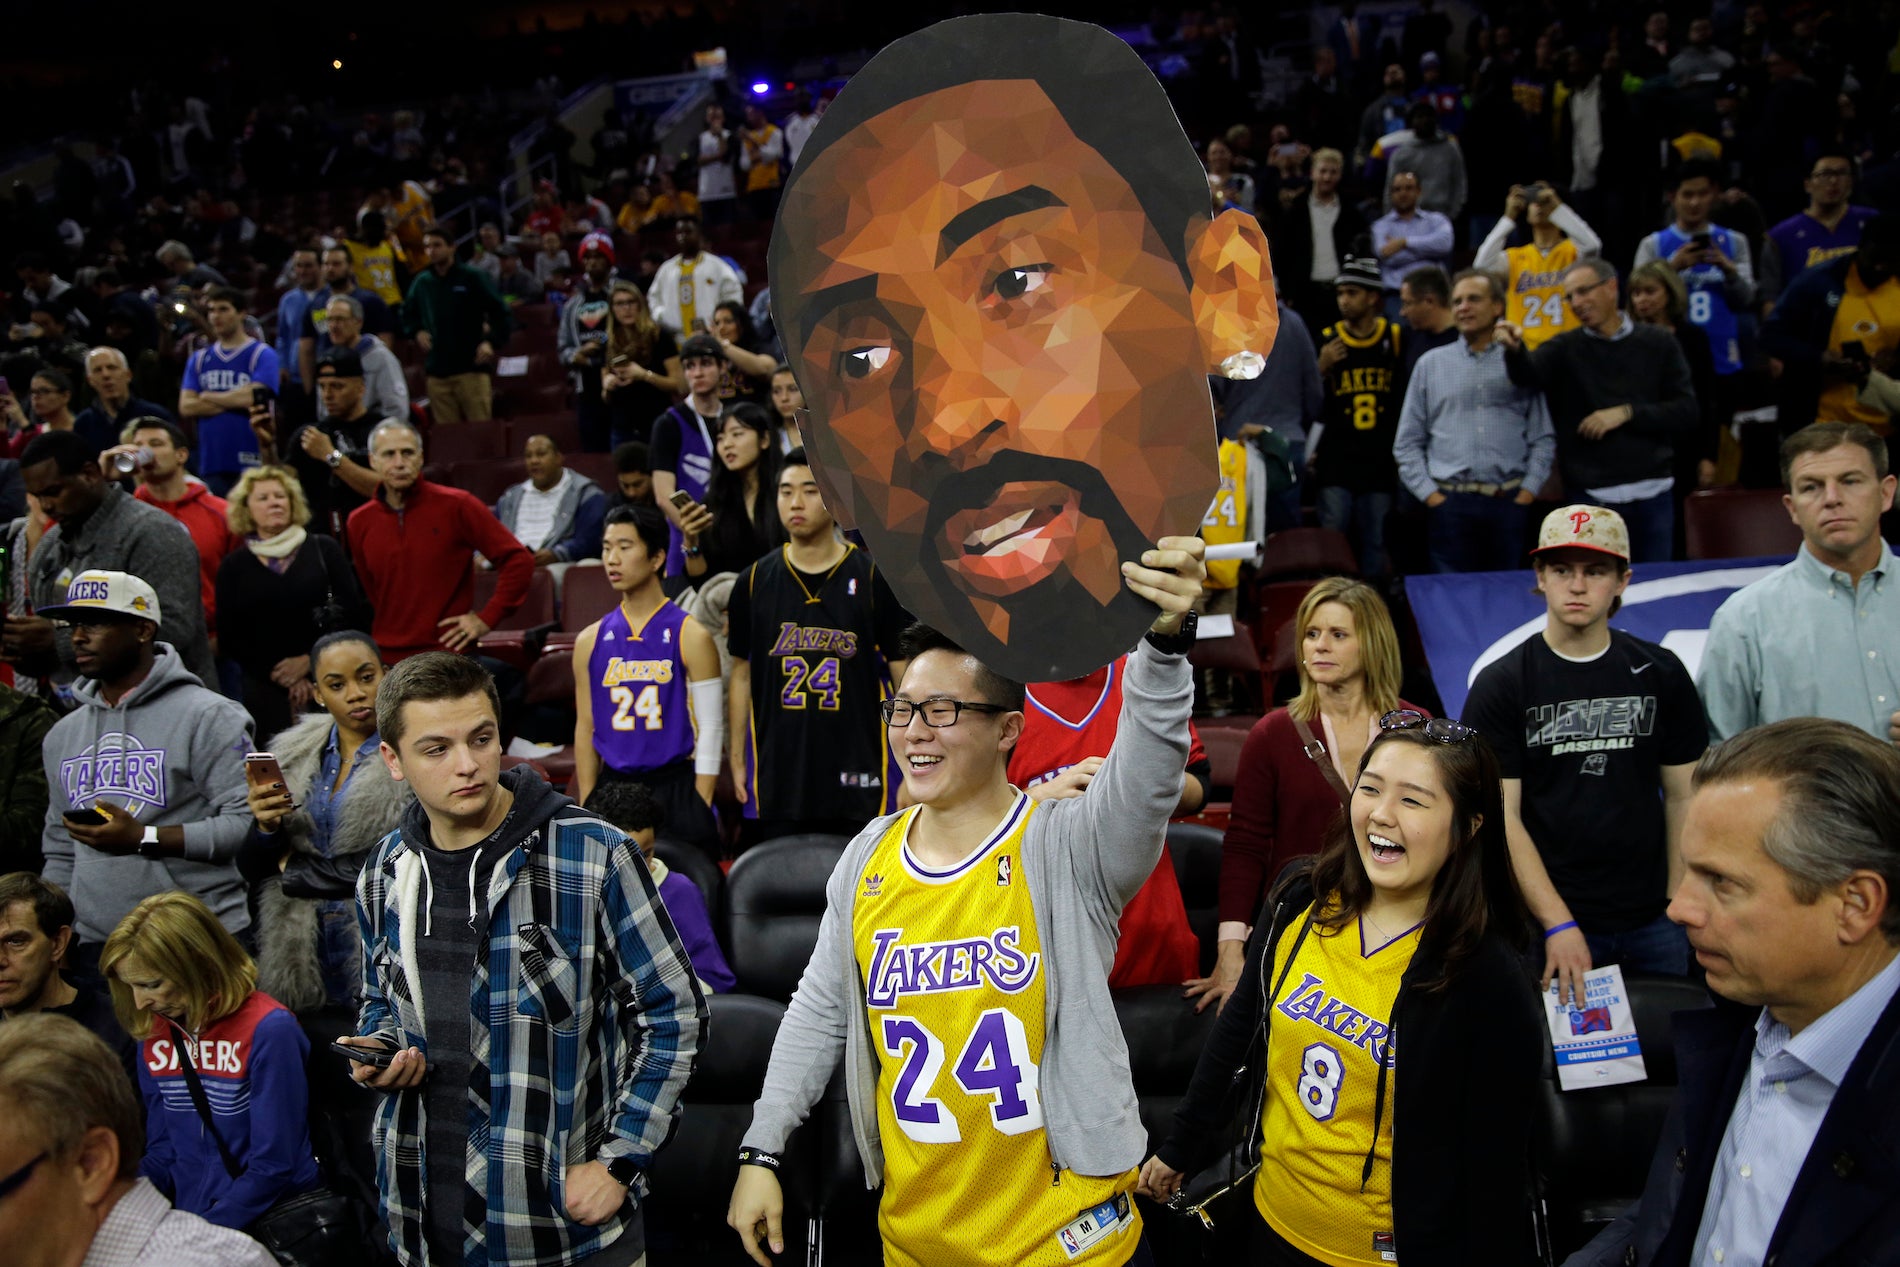 Opinion: Kobe Bryant defied stereotypes and pursued greatness